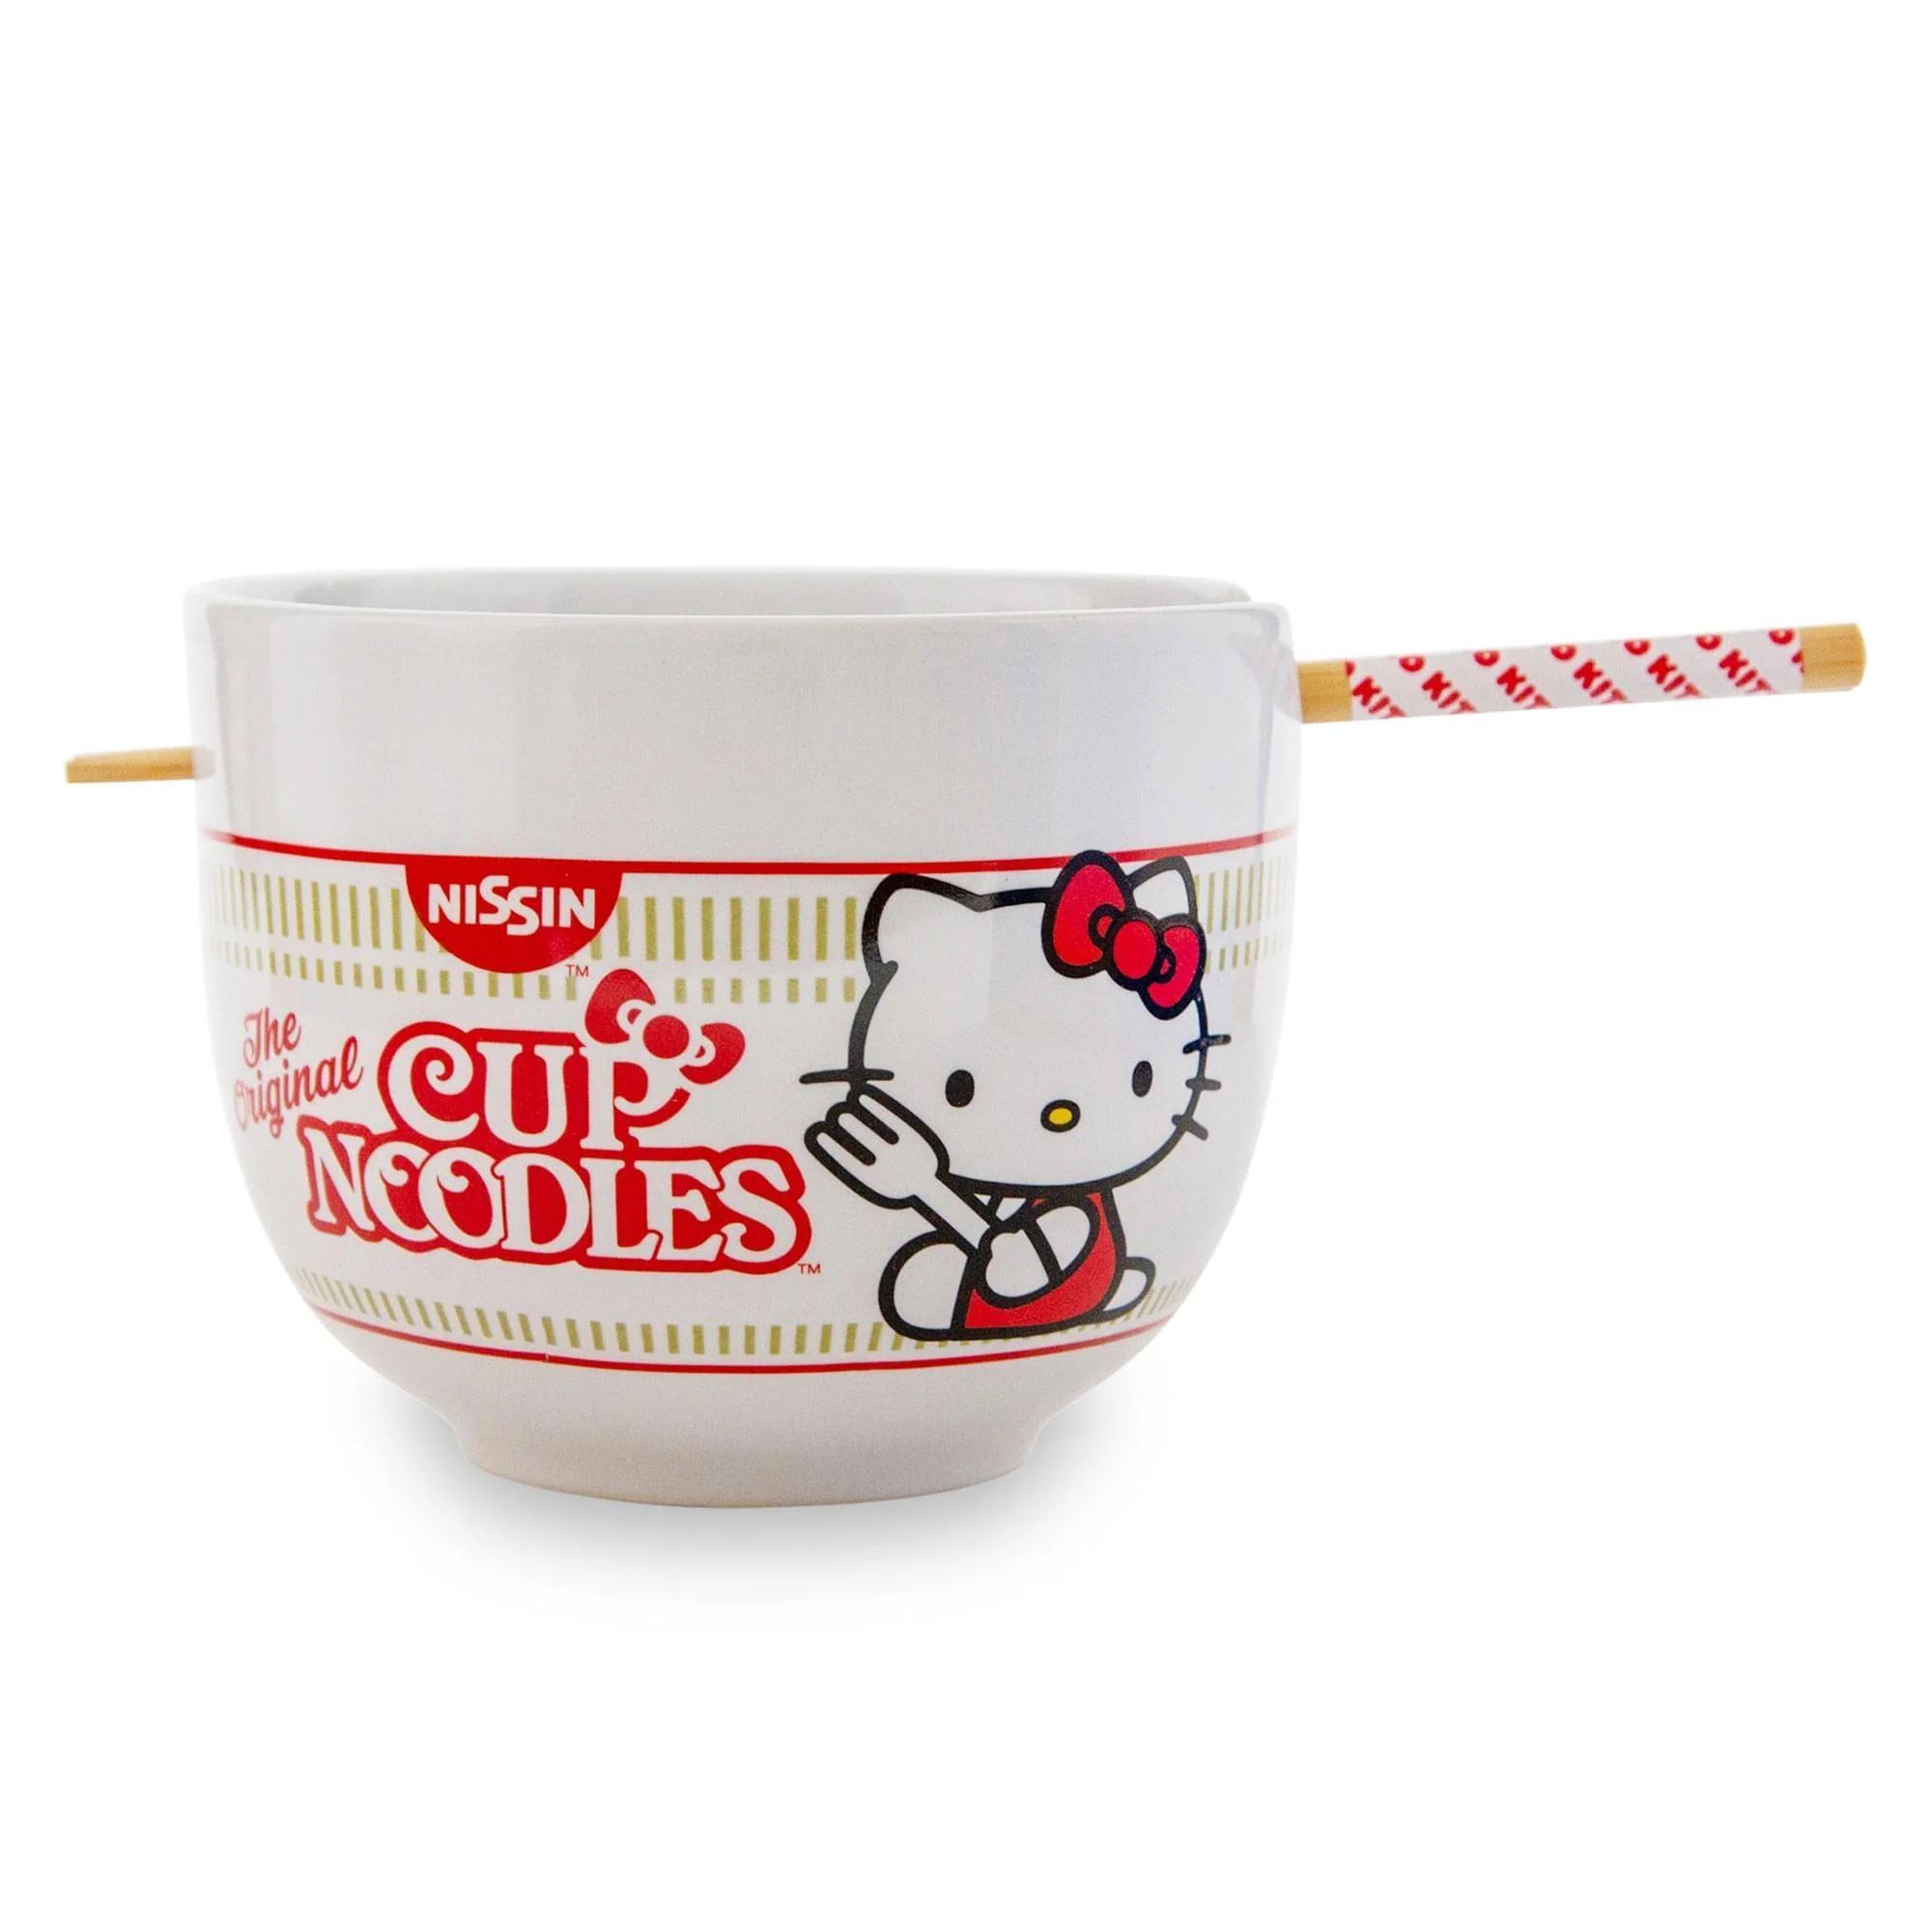 Sanrio Hello Kitty x Nissin Cup Noodles 20-Ounce Ramen Bowl and Chopstick Set | Toynk